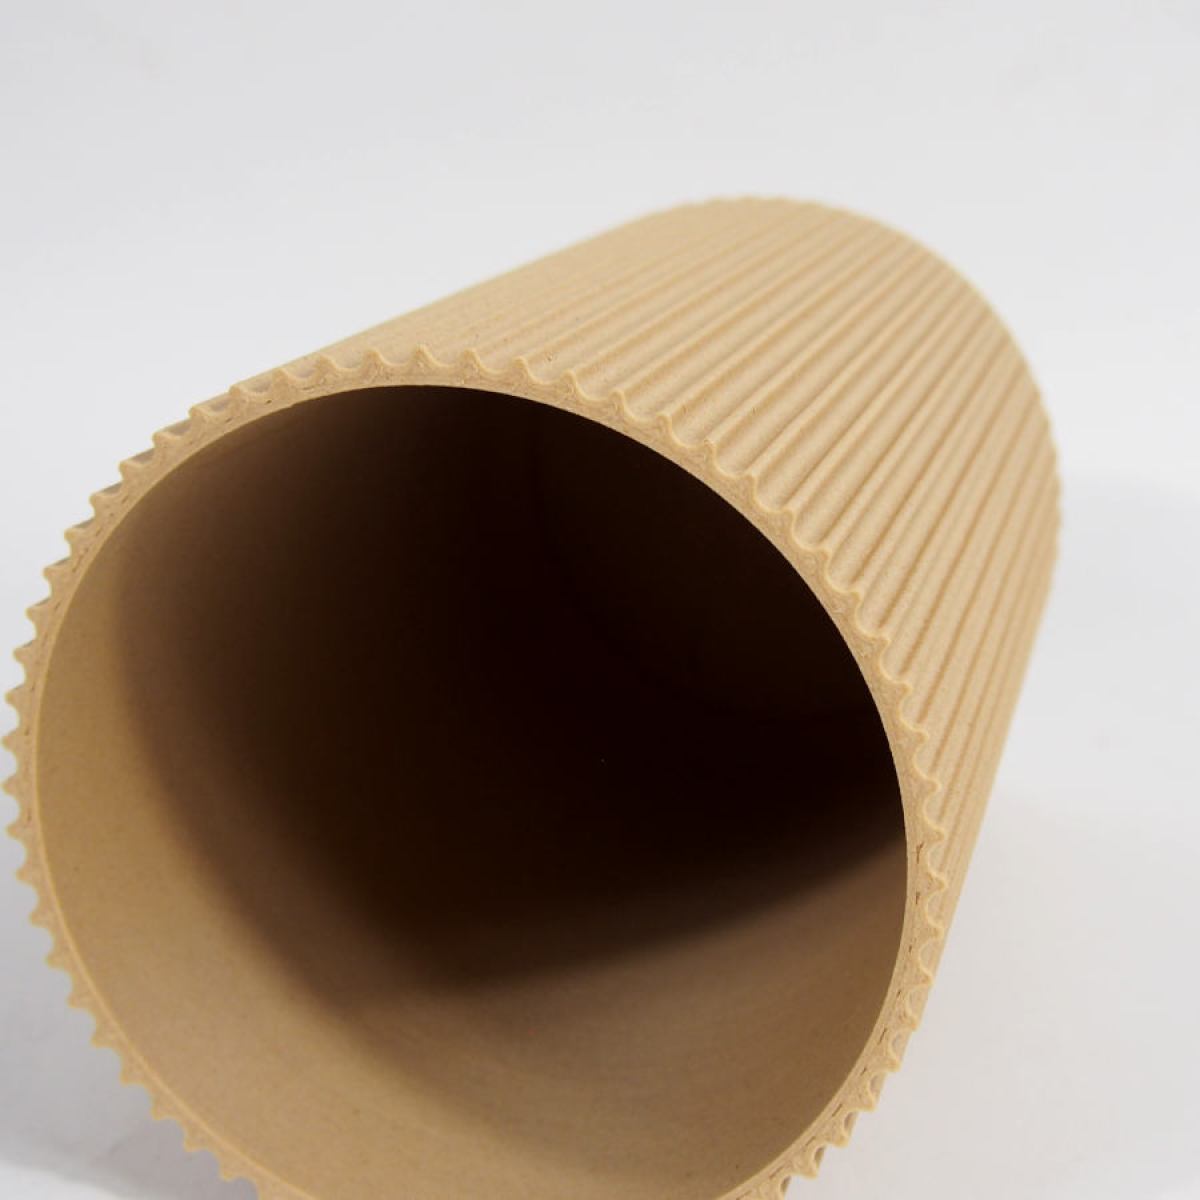 Sustainable design vase with groove structure Ø 11 cm